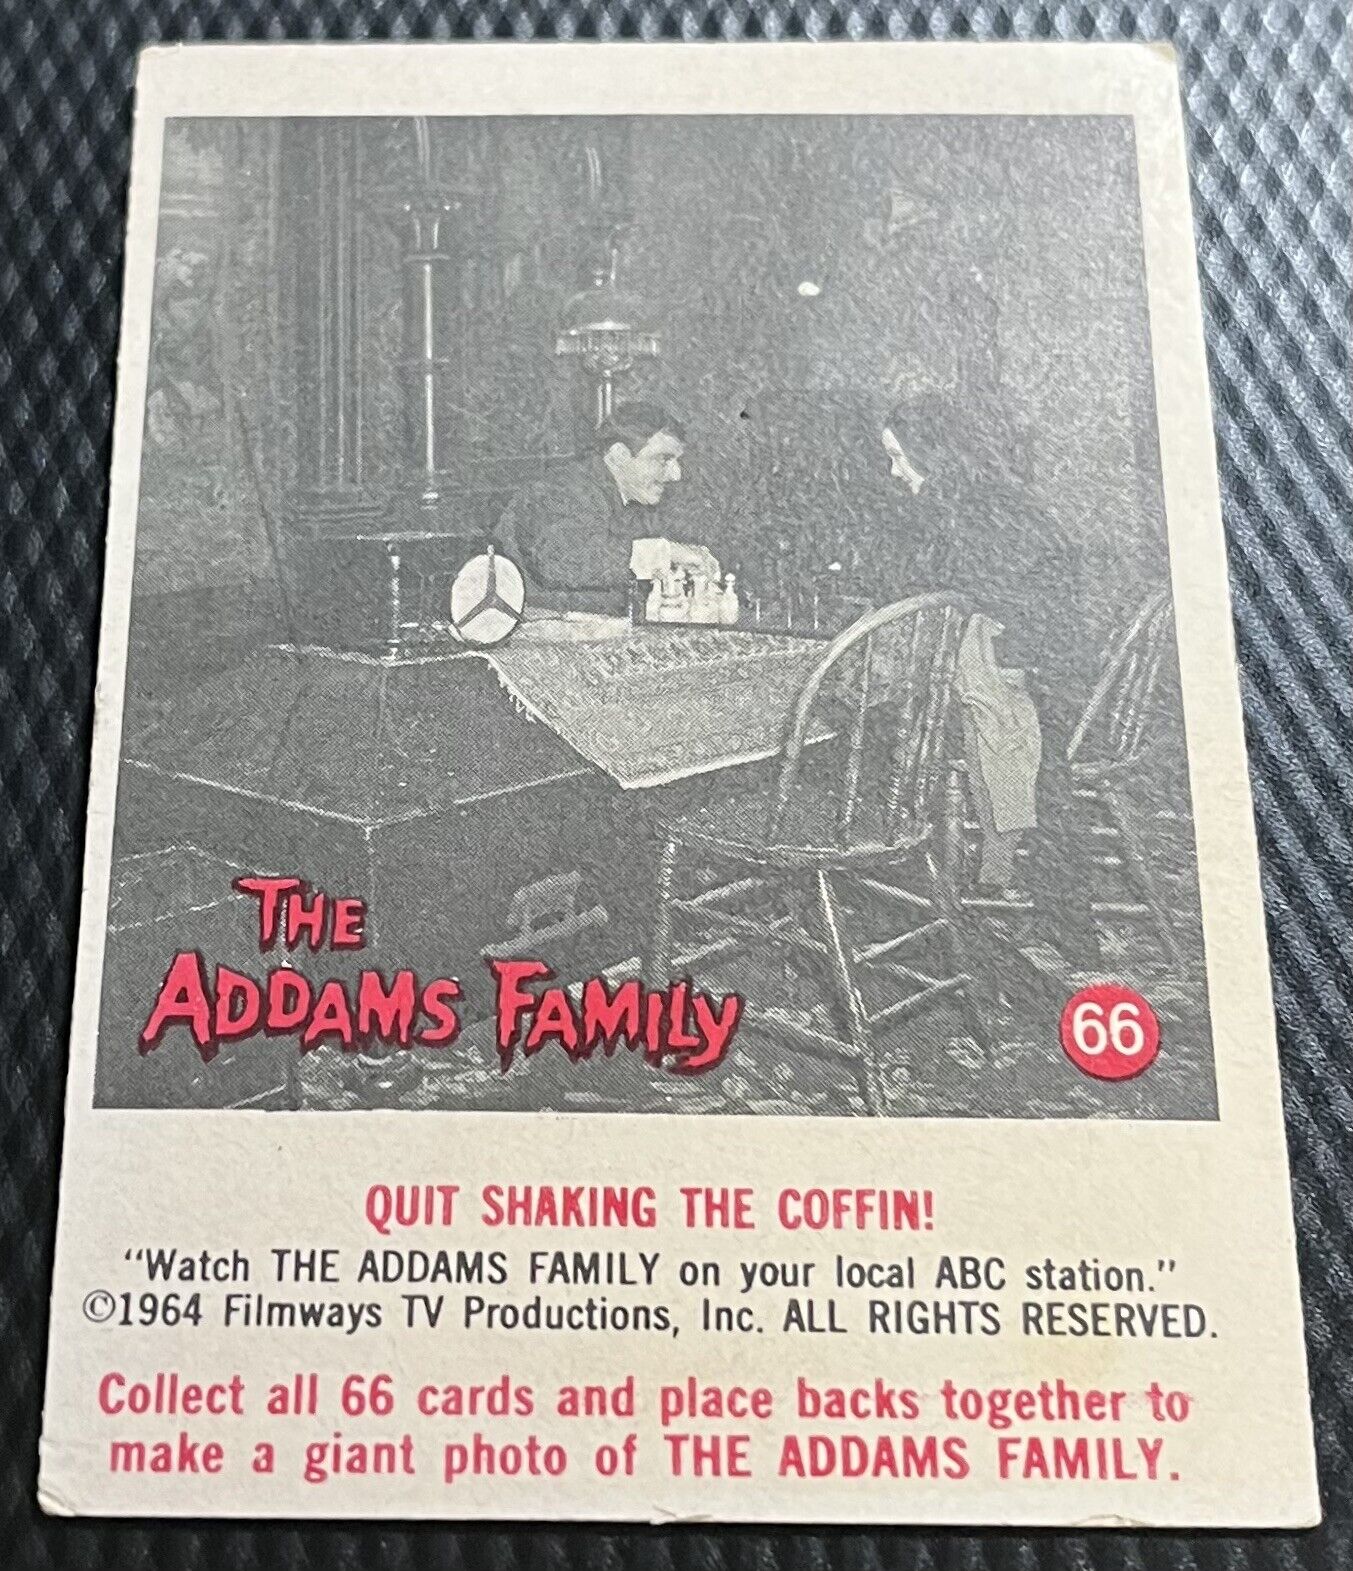 1964 Filmways Addams Family Card #66 - Last Card in Set - Mid Grade - No Creases